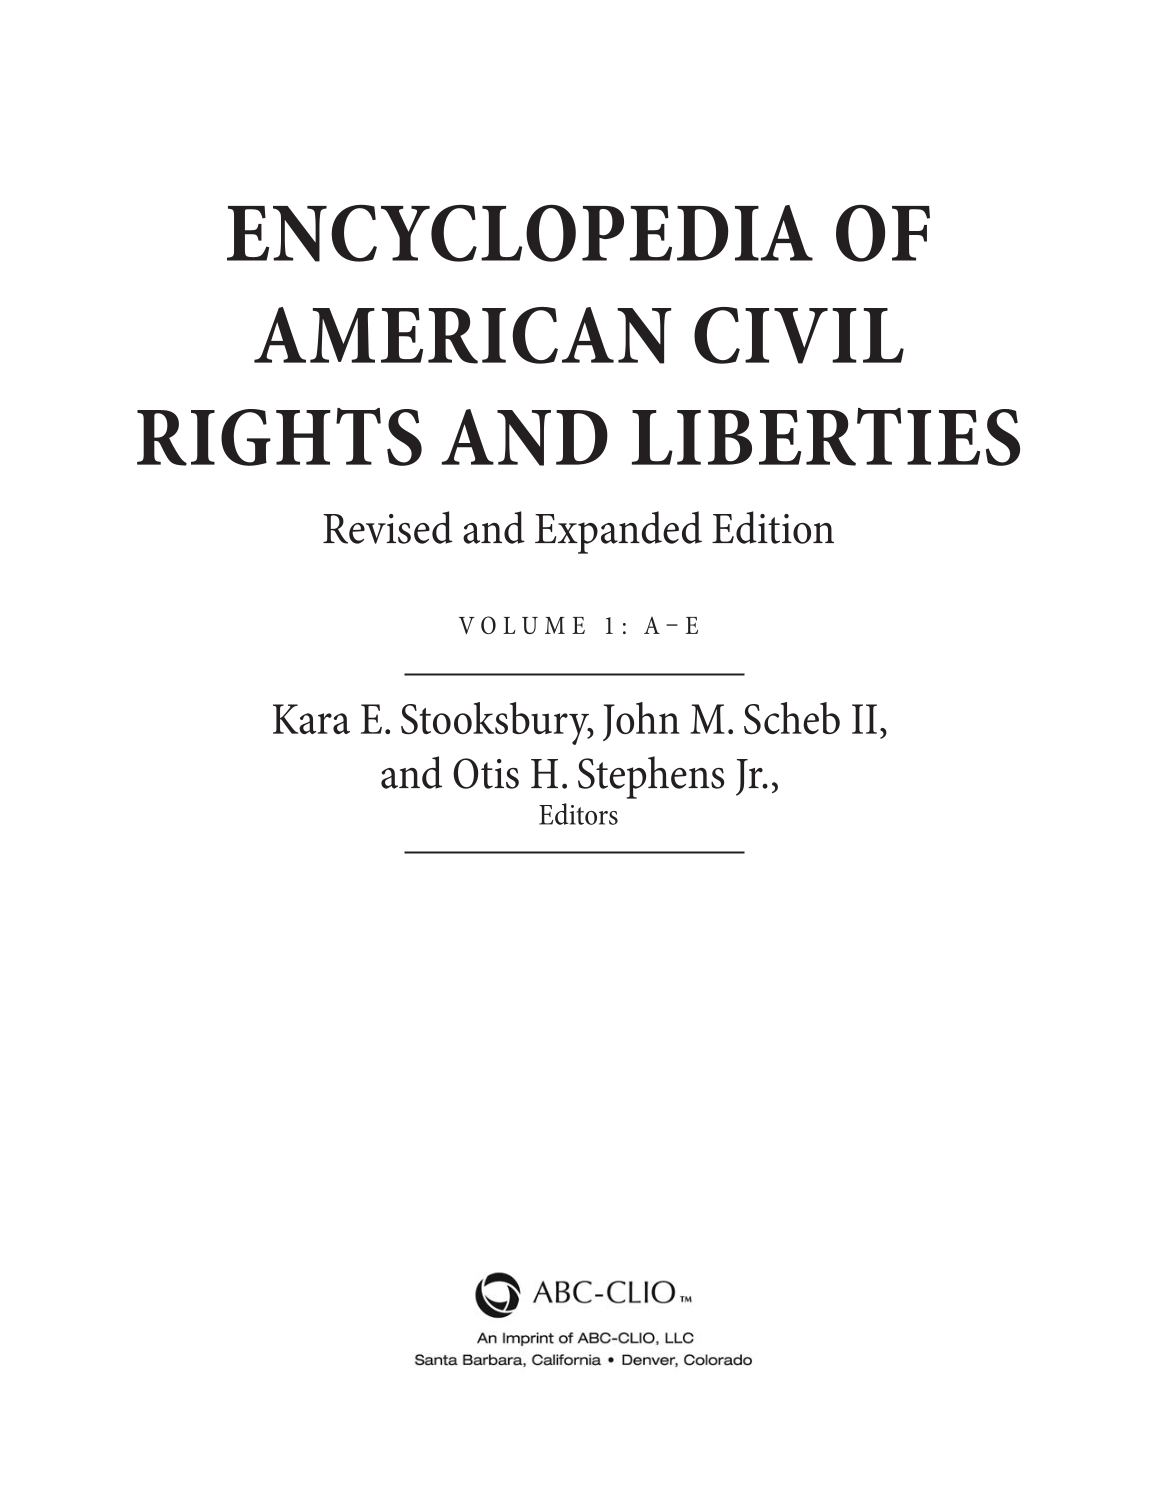 Encyclopedia of American Civil Rights and Liberties: Revised and Expanded Edition, 2nd Edition [4 volumes] page Vol-1:iii